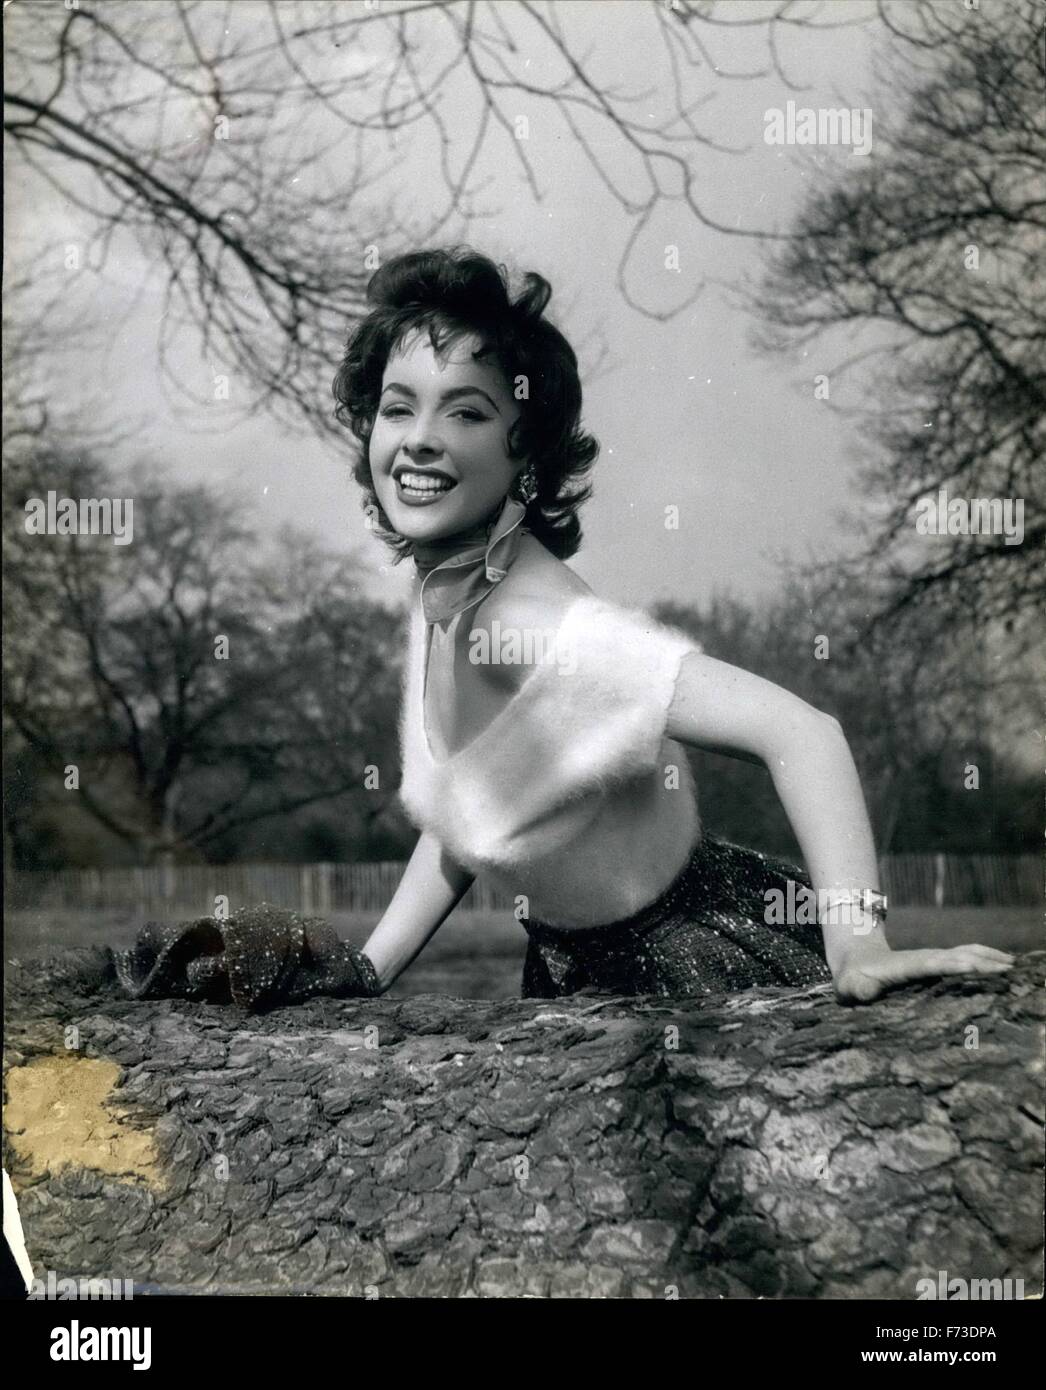 1959 - And Spring Can't Be Far Away Mara Lane, British Star just back from Hollywood, has a rest on one of the fallen elms in the Park. © Keystone Pictures USA/ZUMAPRESS.com/Alamy Live News Stock Photo